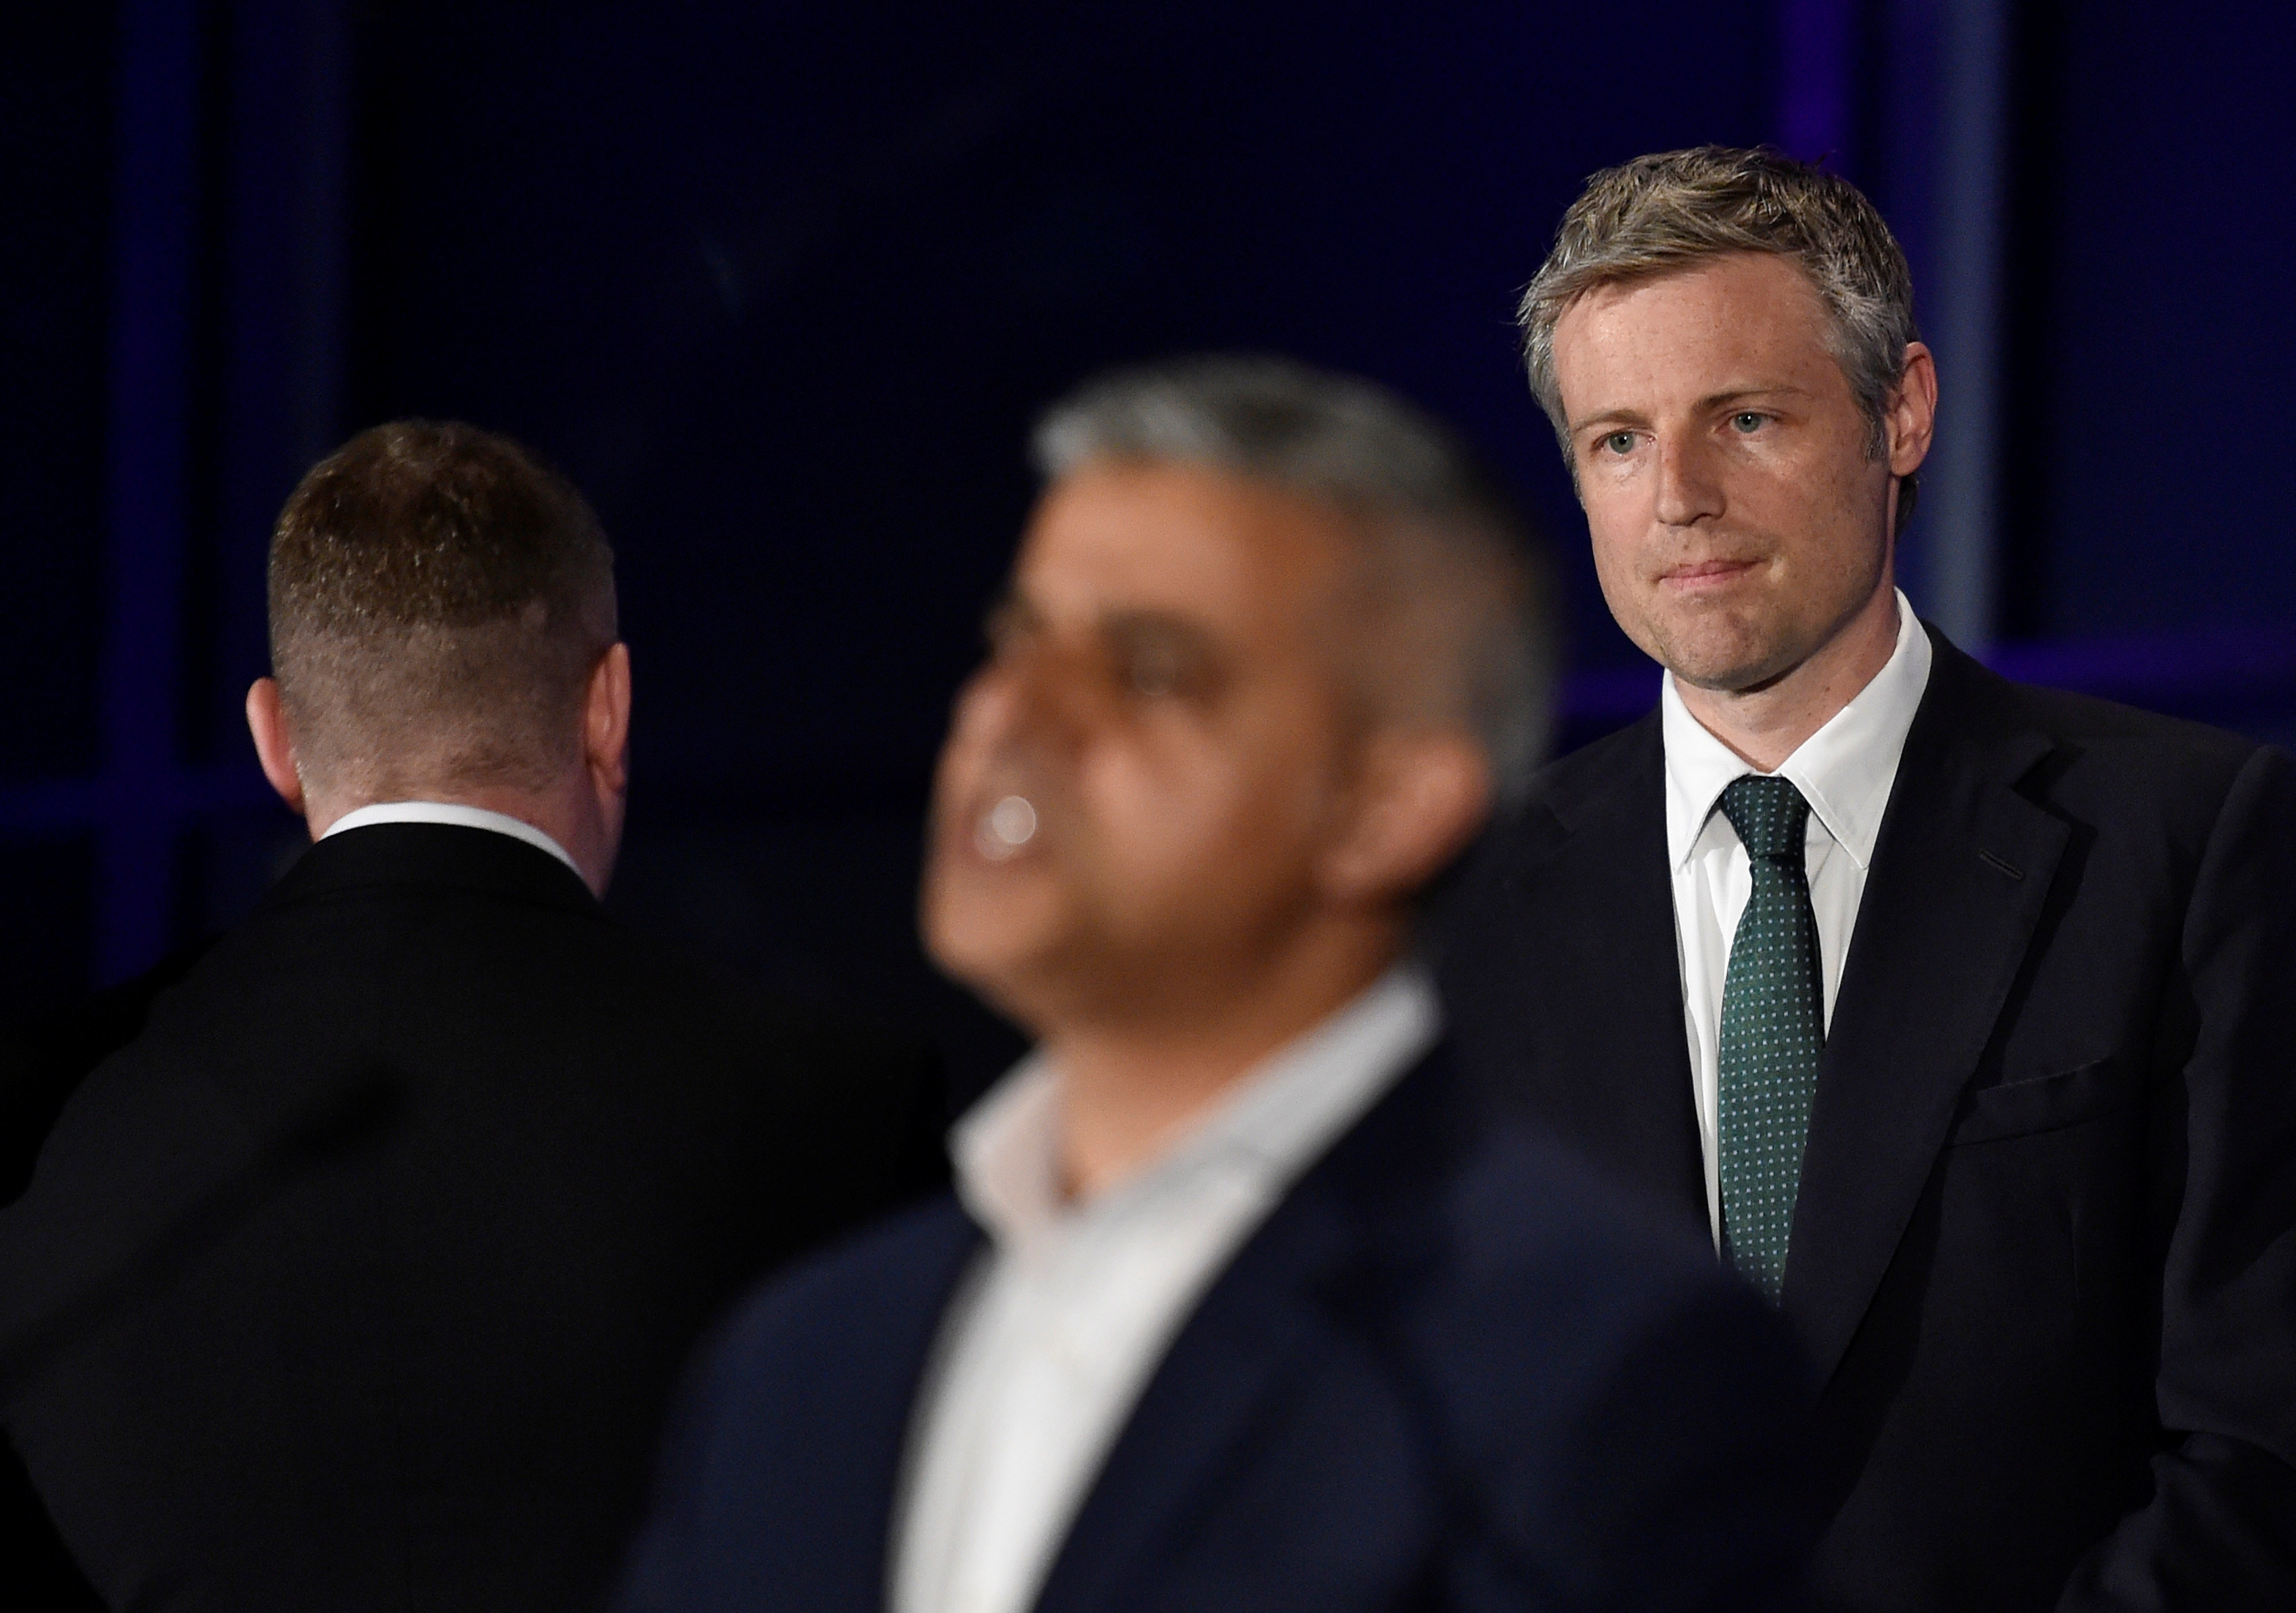 Paul Golding (left) turns his back as Sadiq Khan (centre) gives a speech having just been elected mayor of London